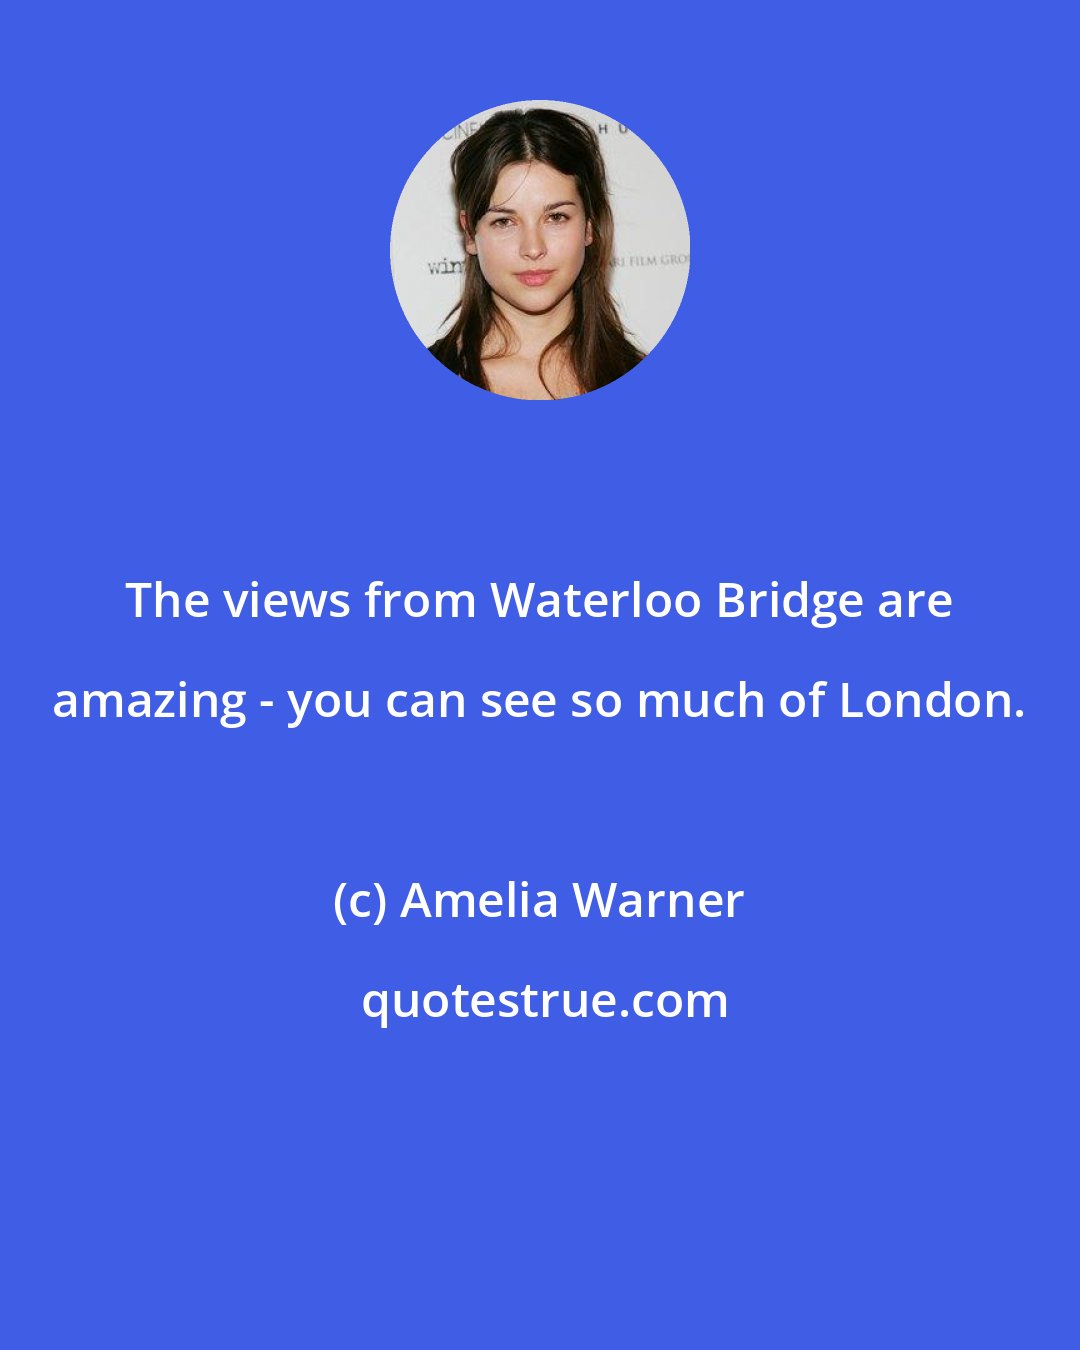 Amelia Warner: The views from Waterloo Bridge are amazing - you can see so much of London.